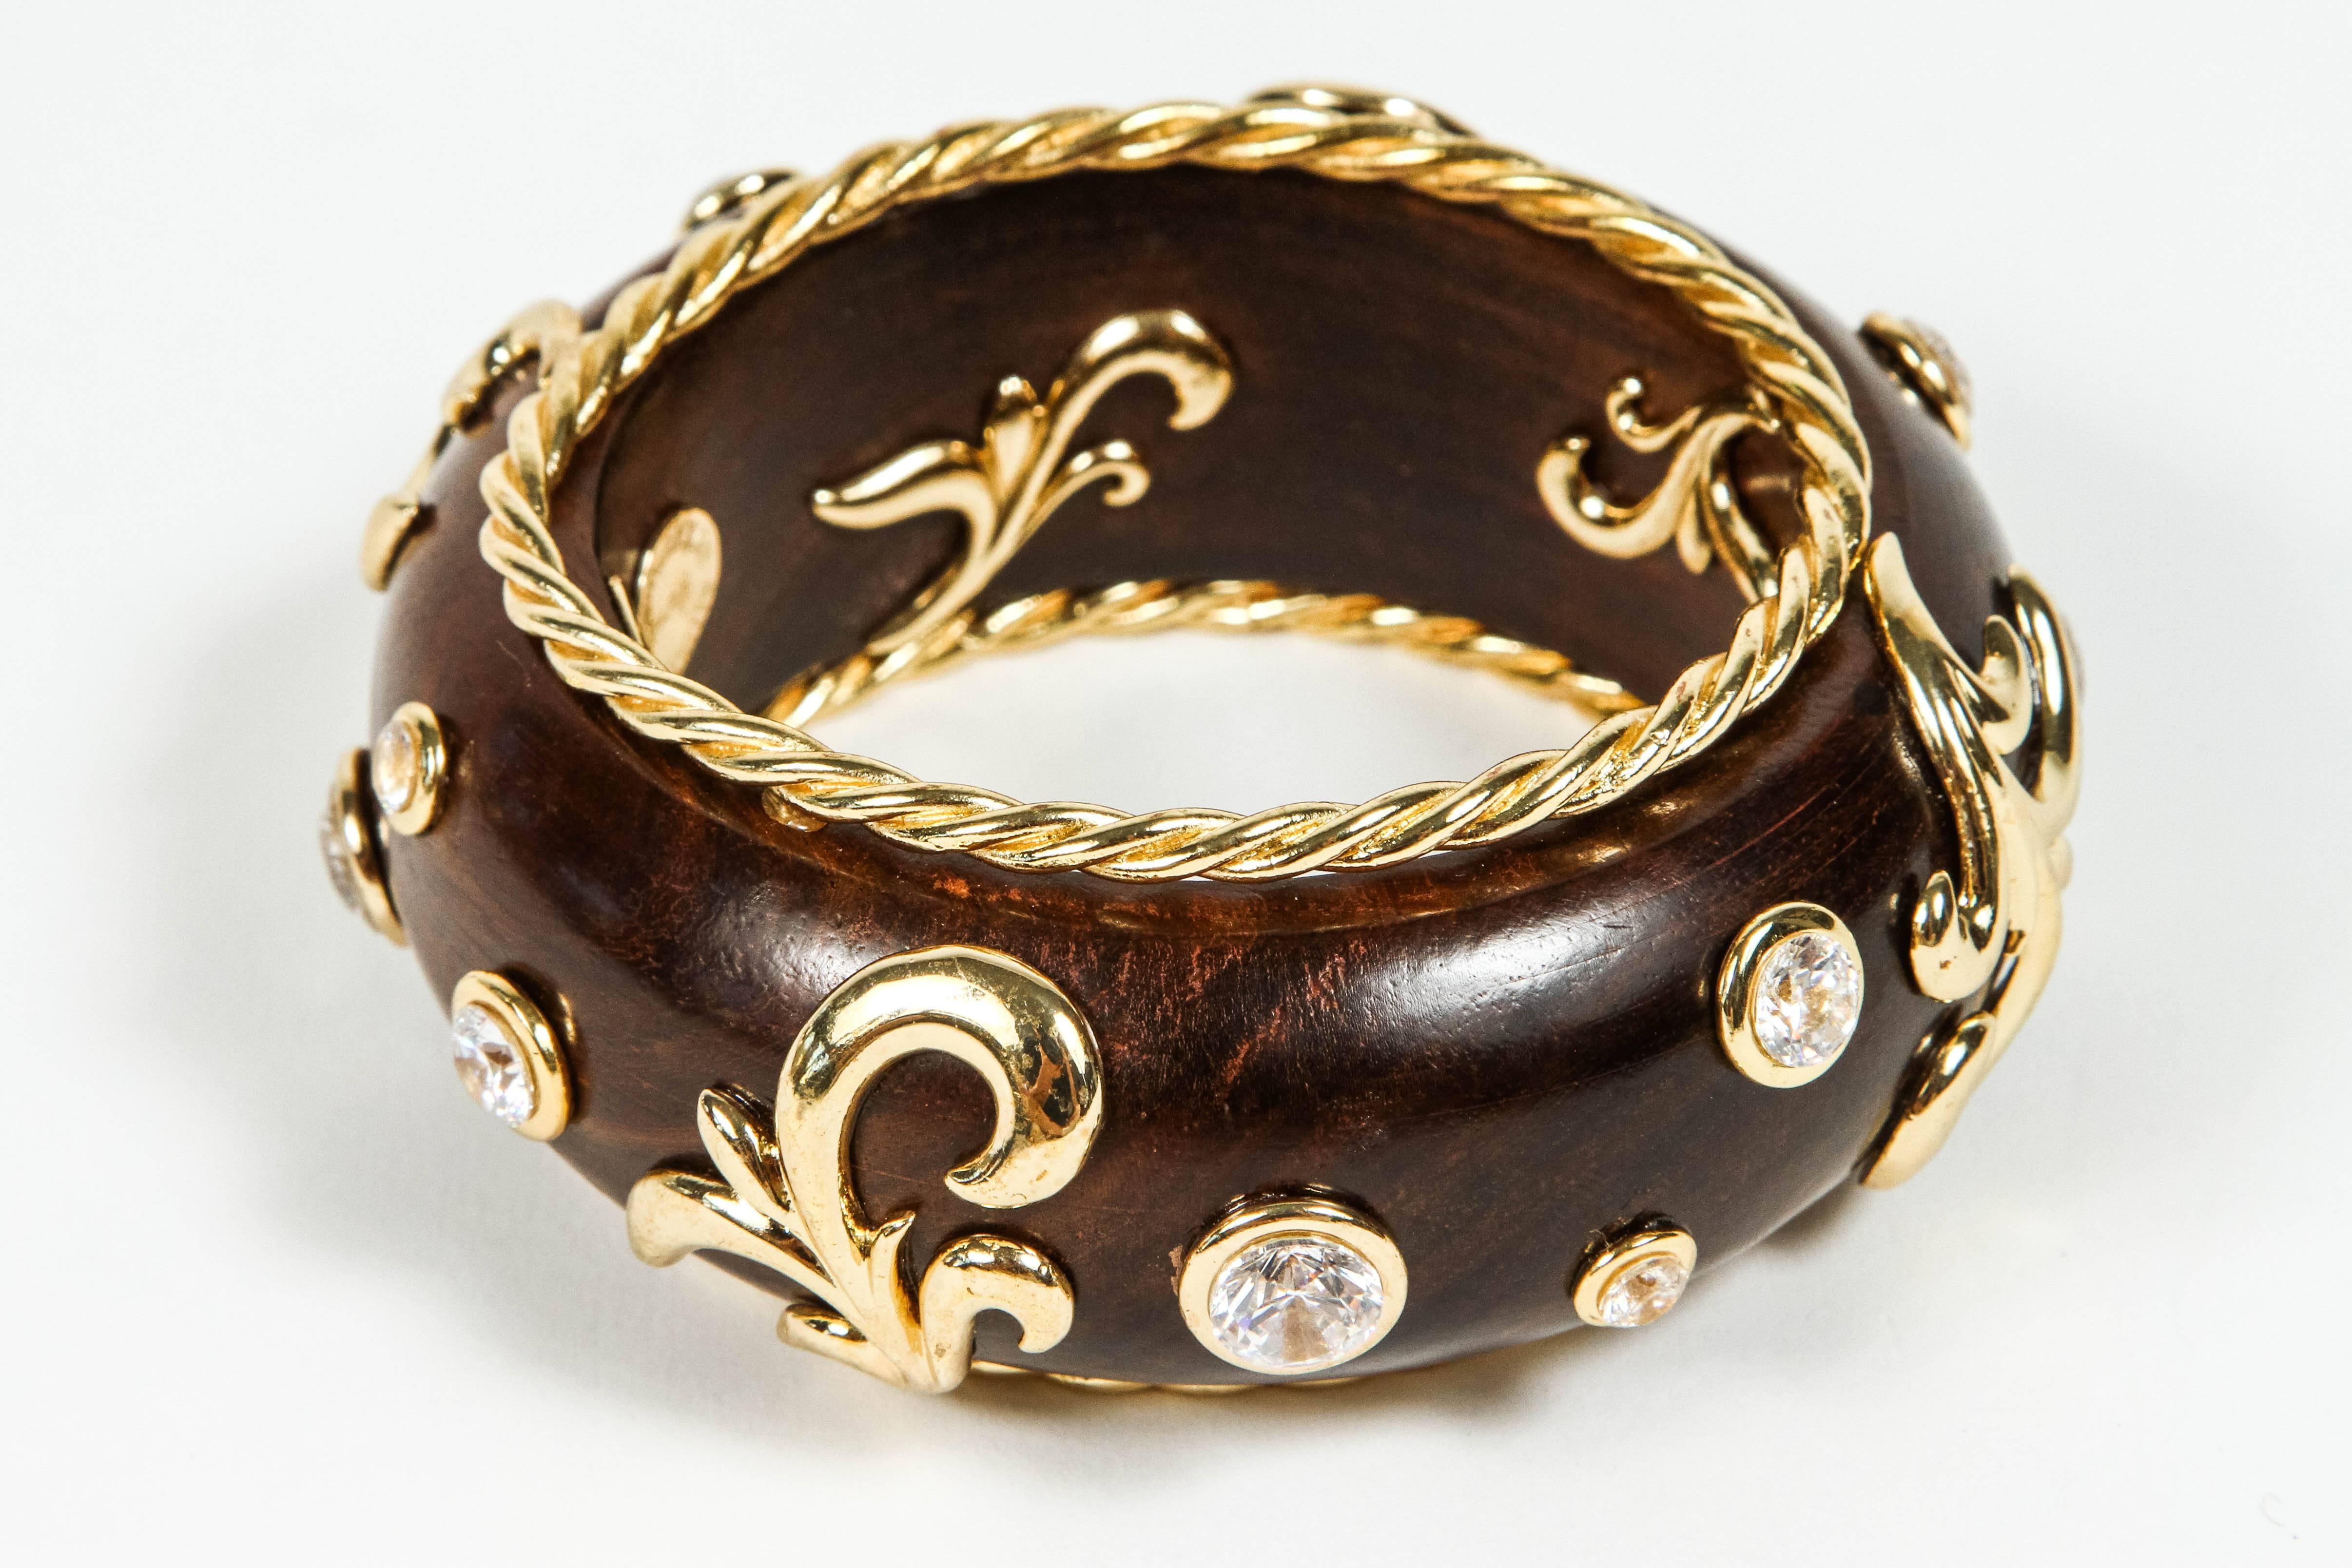 This bangle is a showstopper.  a polished wood bangle is decorated with the addition of gilt metal swirls and brilliant rhinestones bezel set into the wood.
